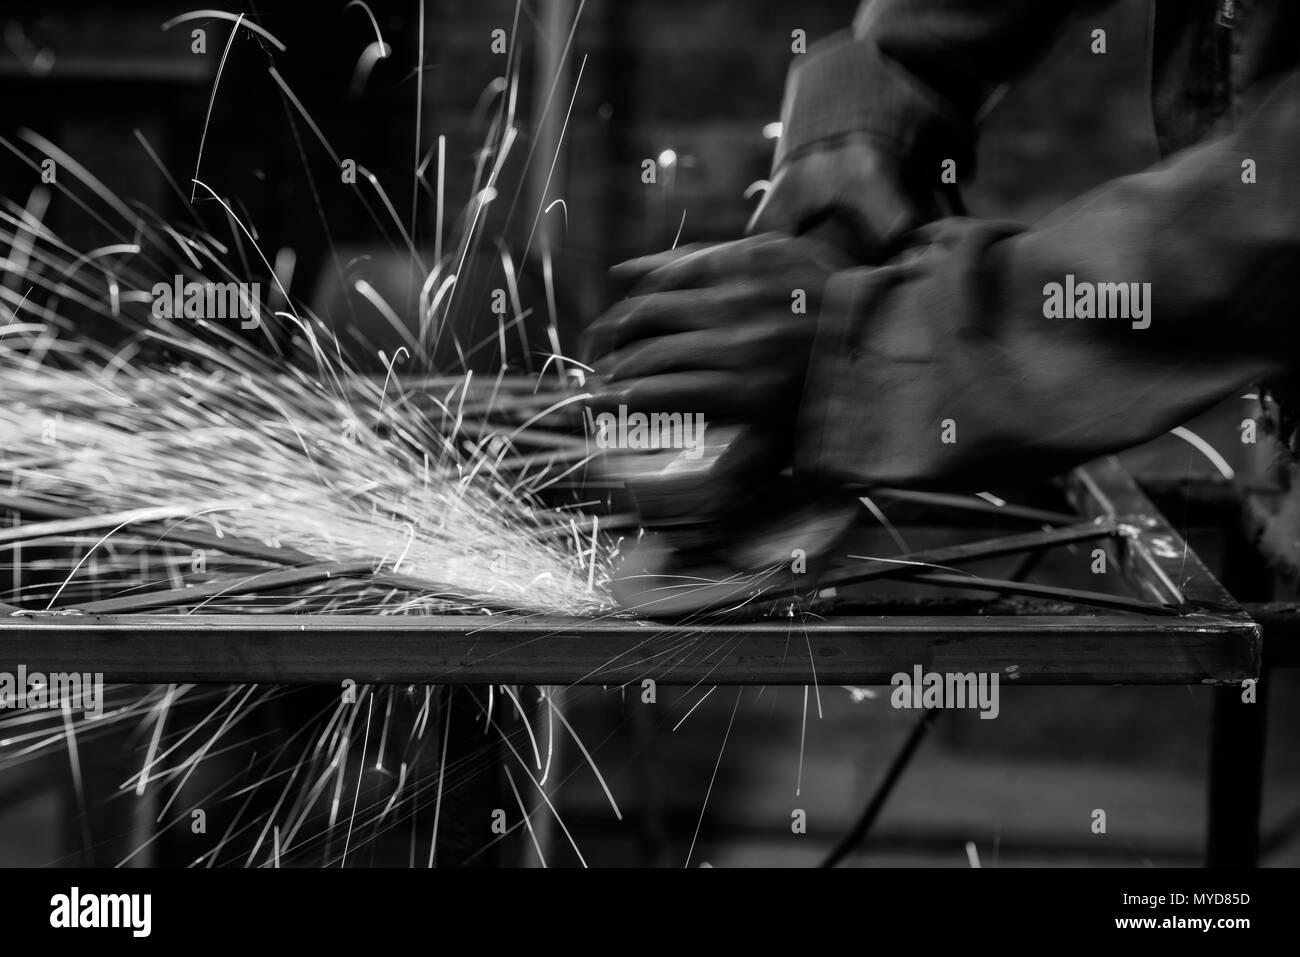 A grinder smoothing a metal table Stock Photo